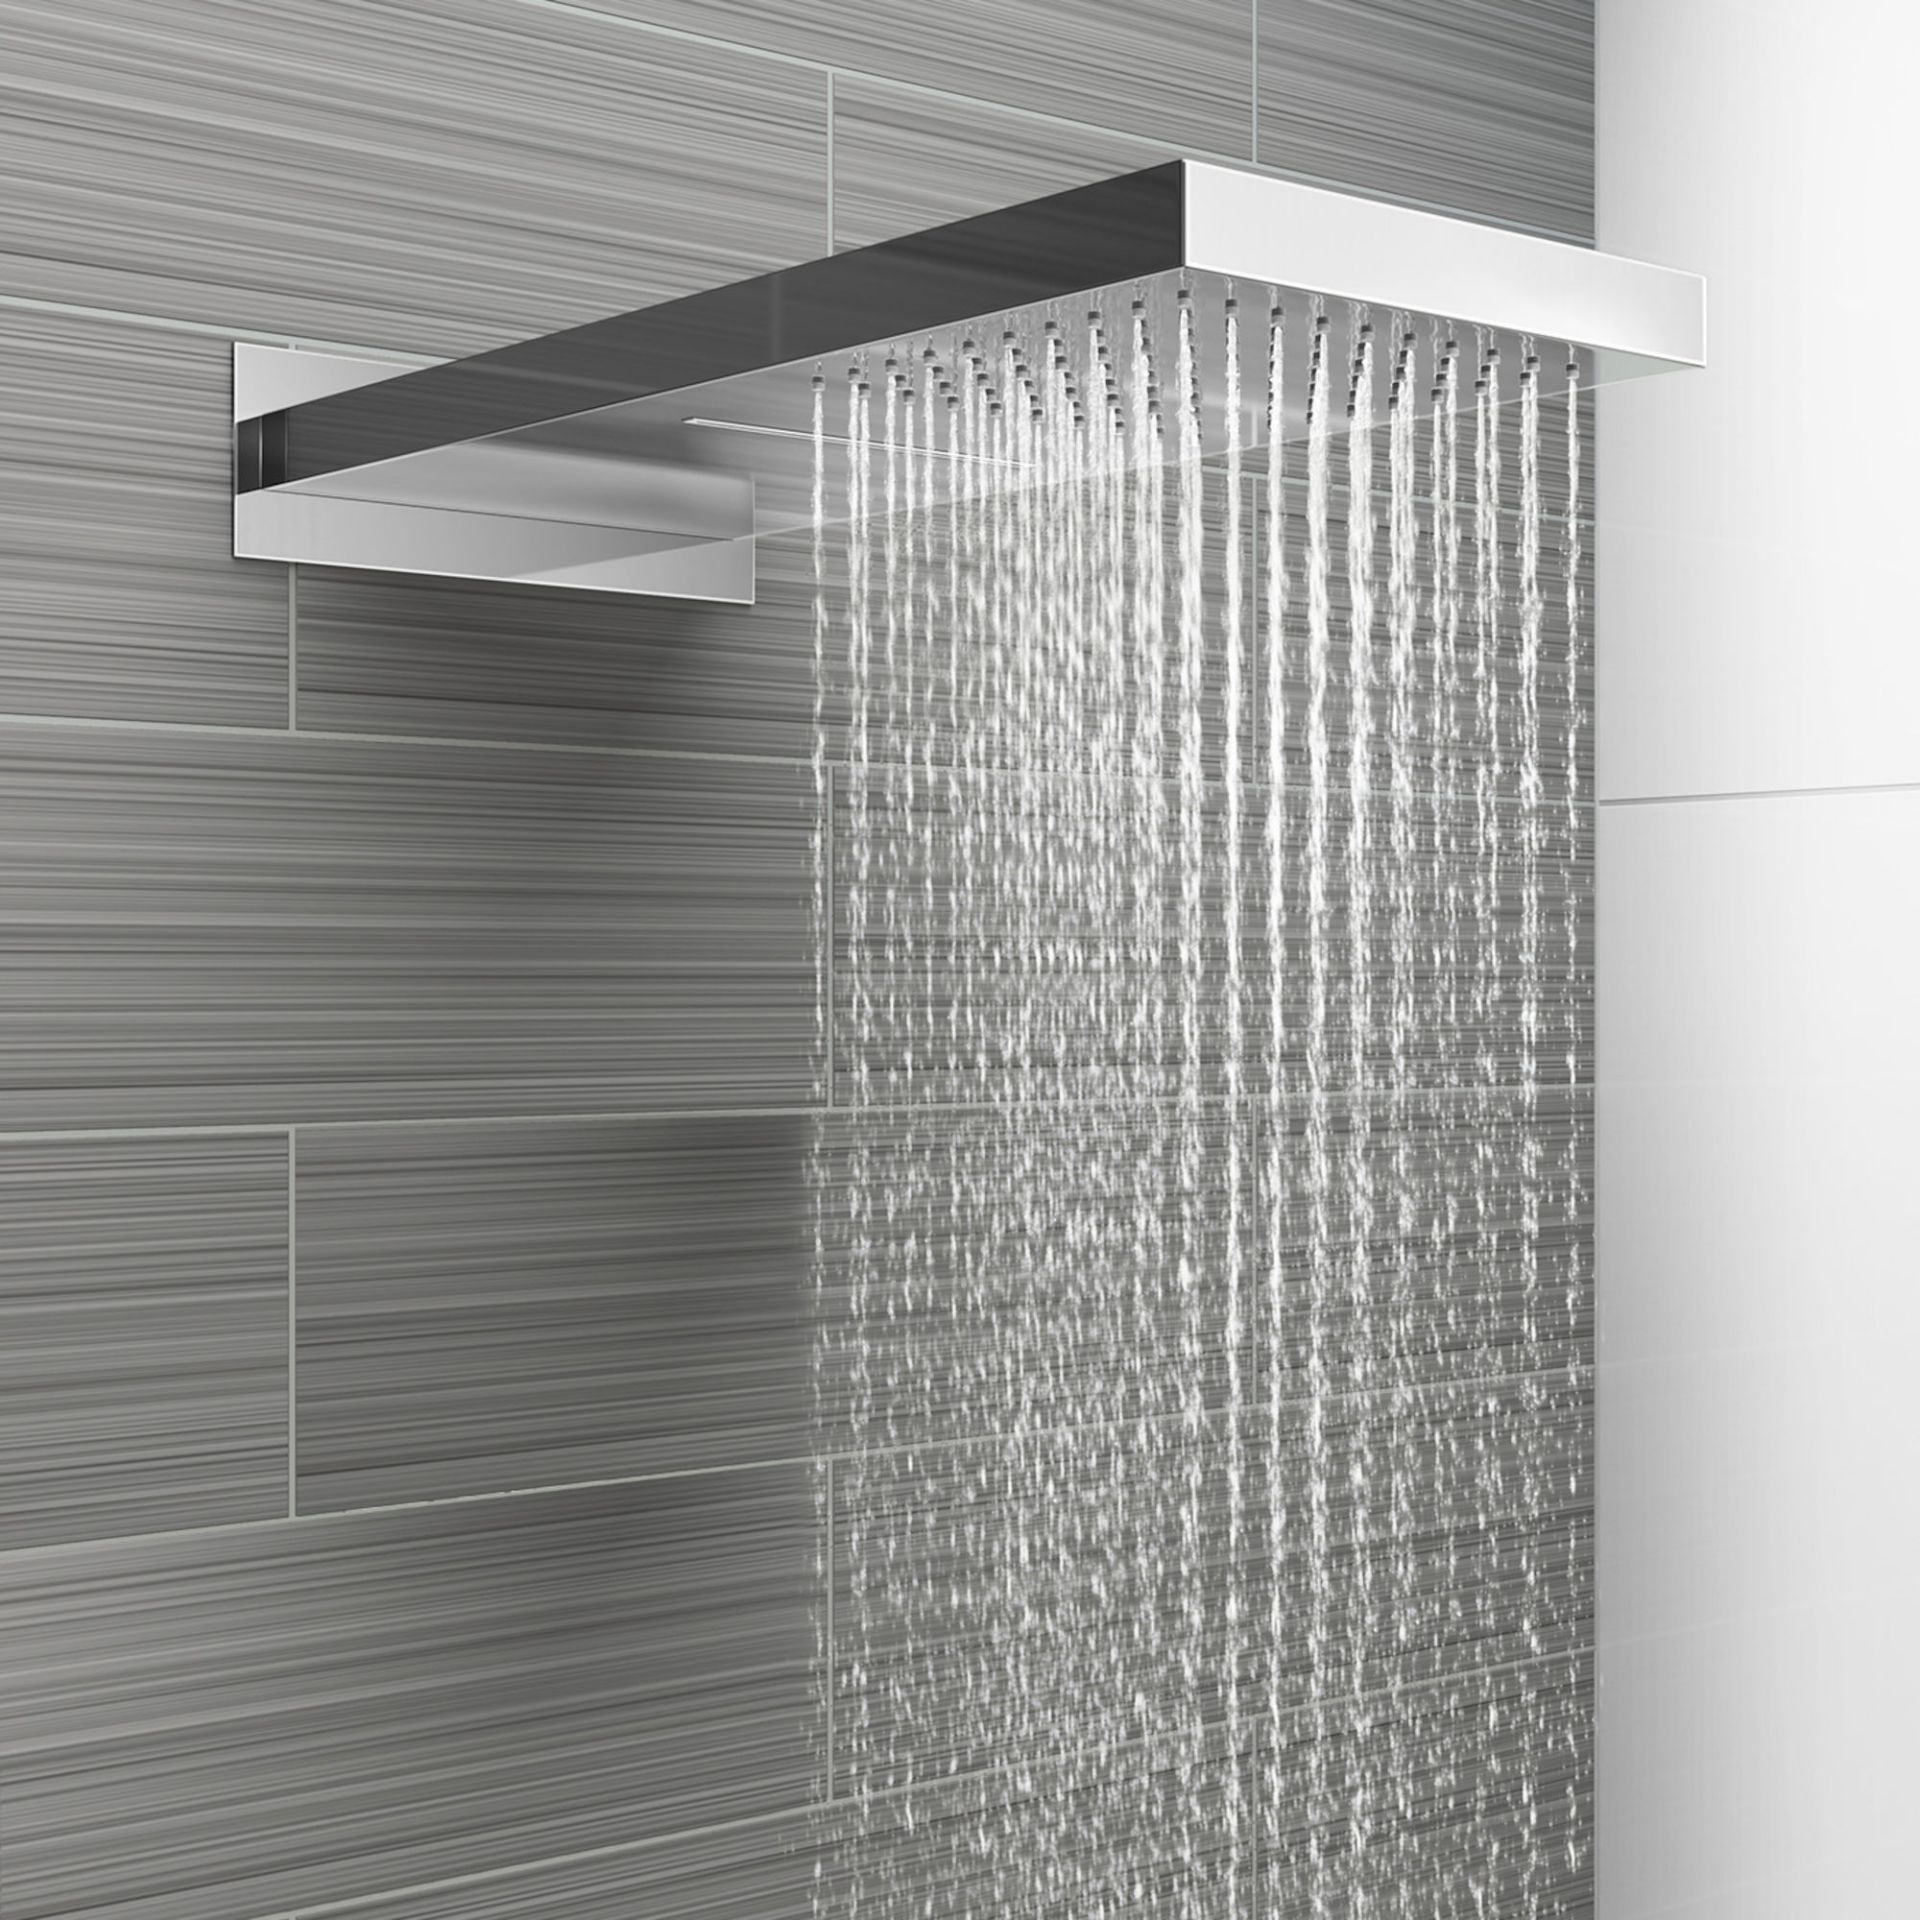 (DK5) Stainless Steel 230x500mm Waterfall Shower Head. RRP £374.98. Dual function waterfall and - Image 3 of 6